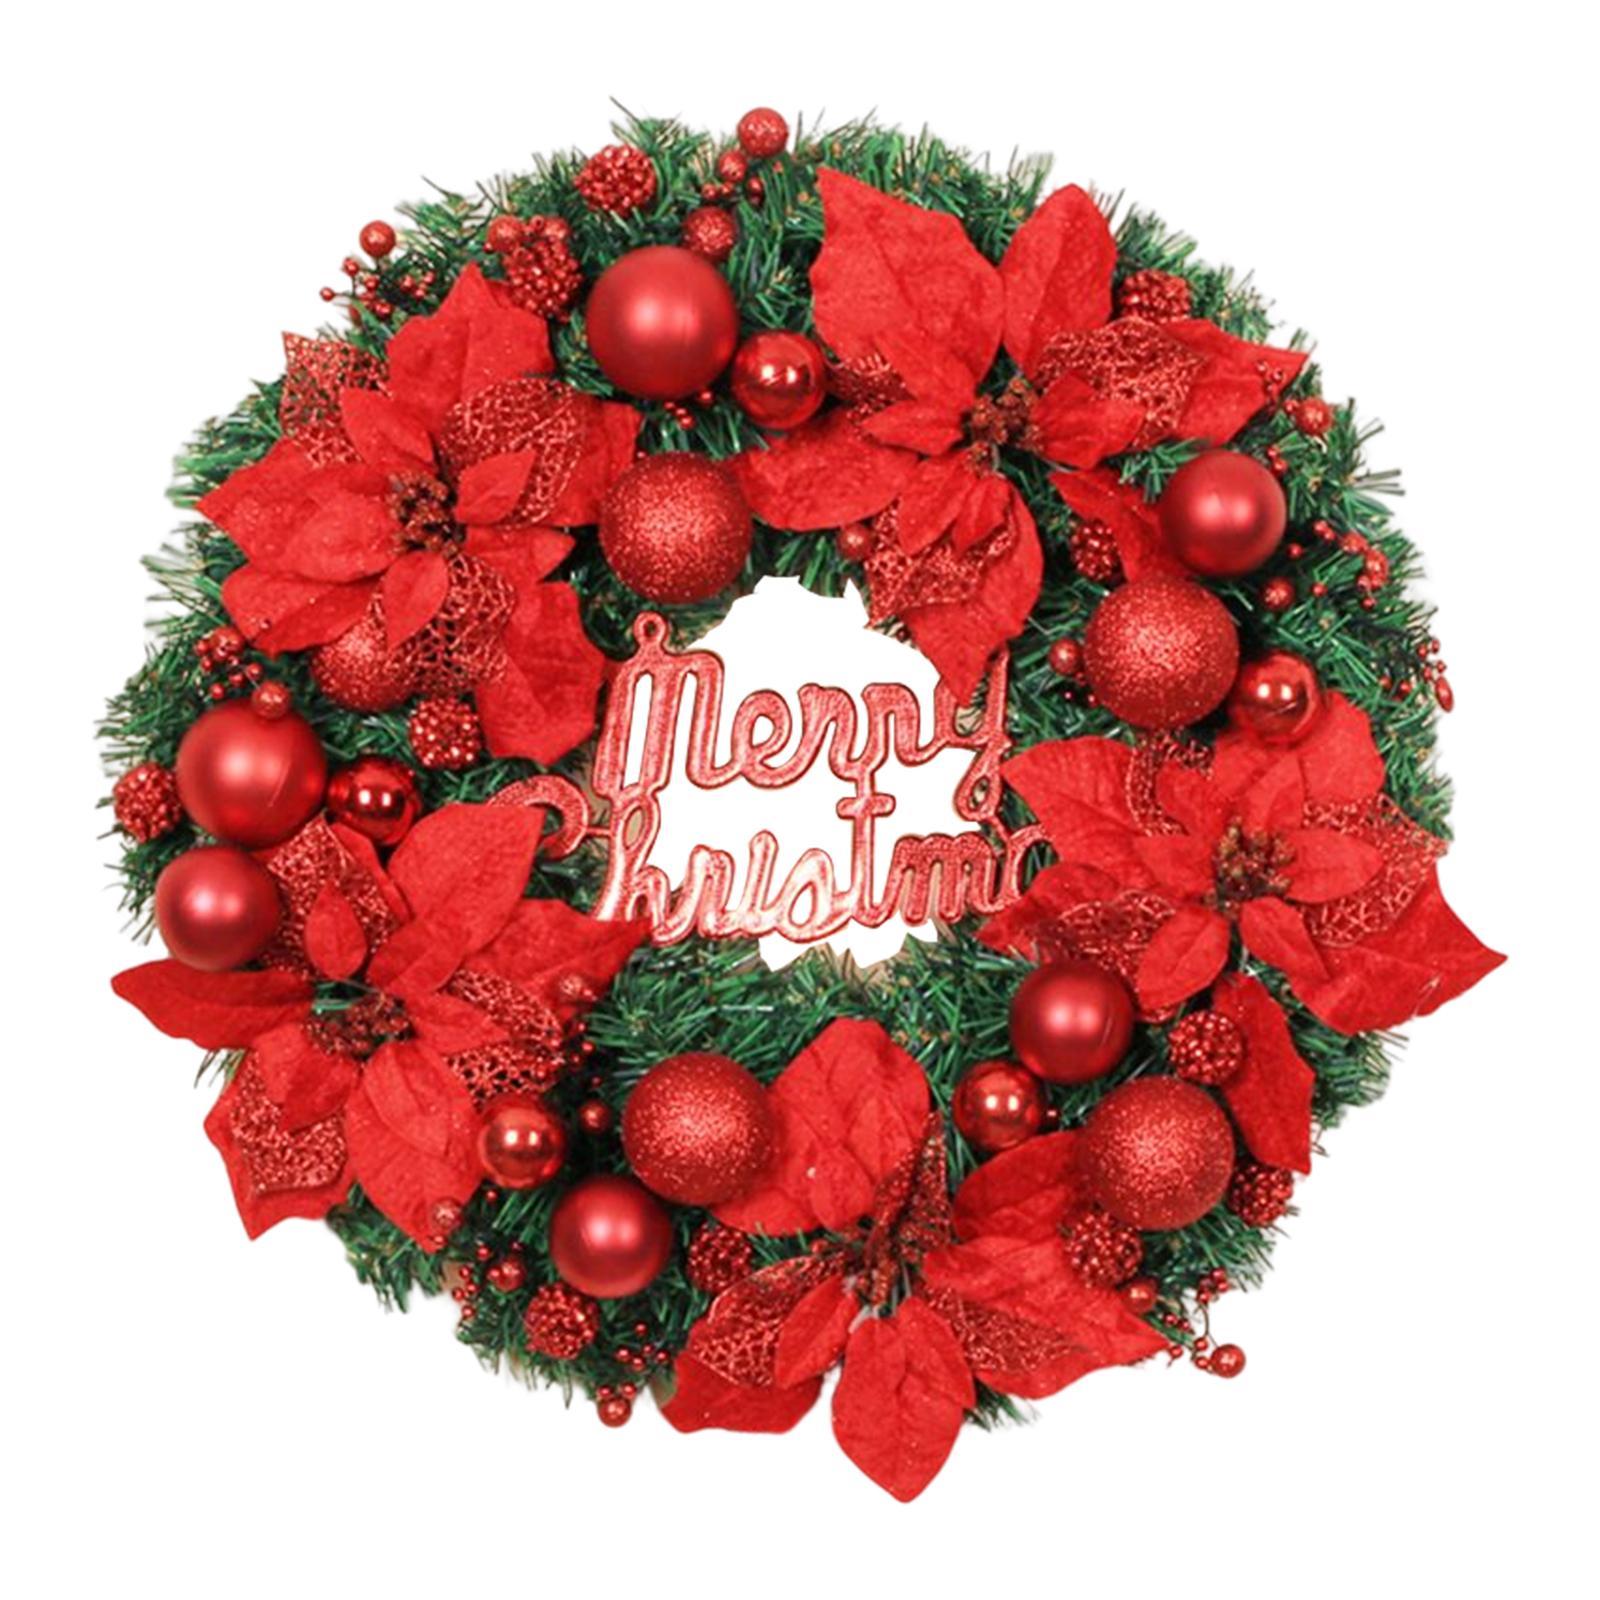 Christmas Door Wreath Green Leaves Wreaths Ball Ornament for Holiday